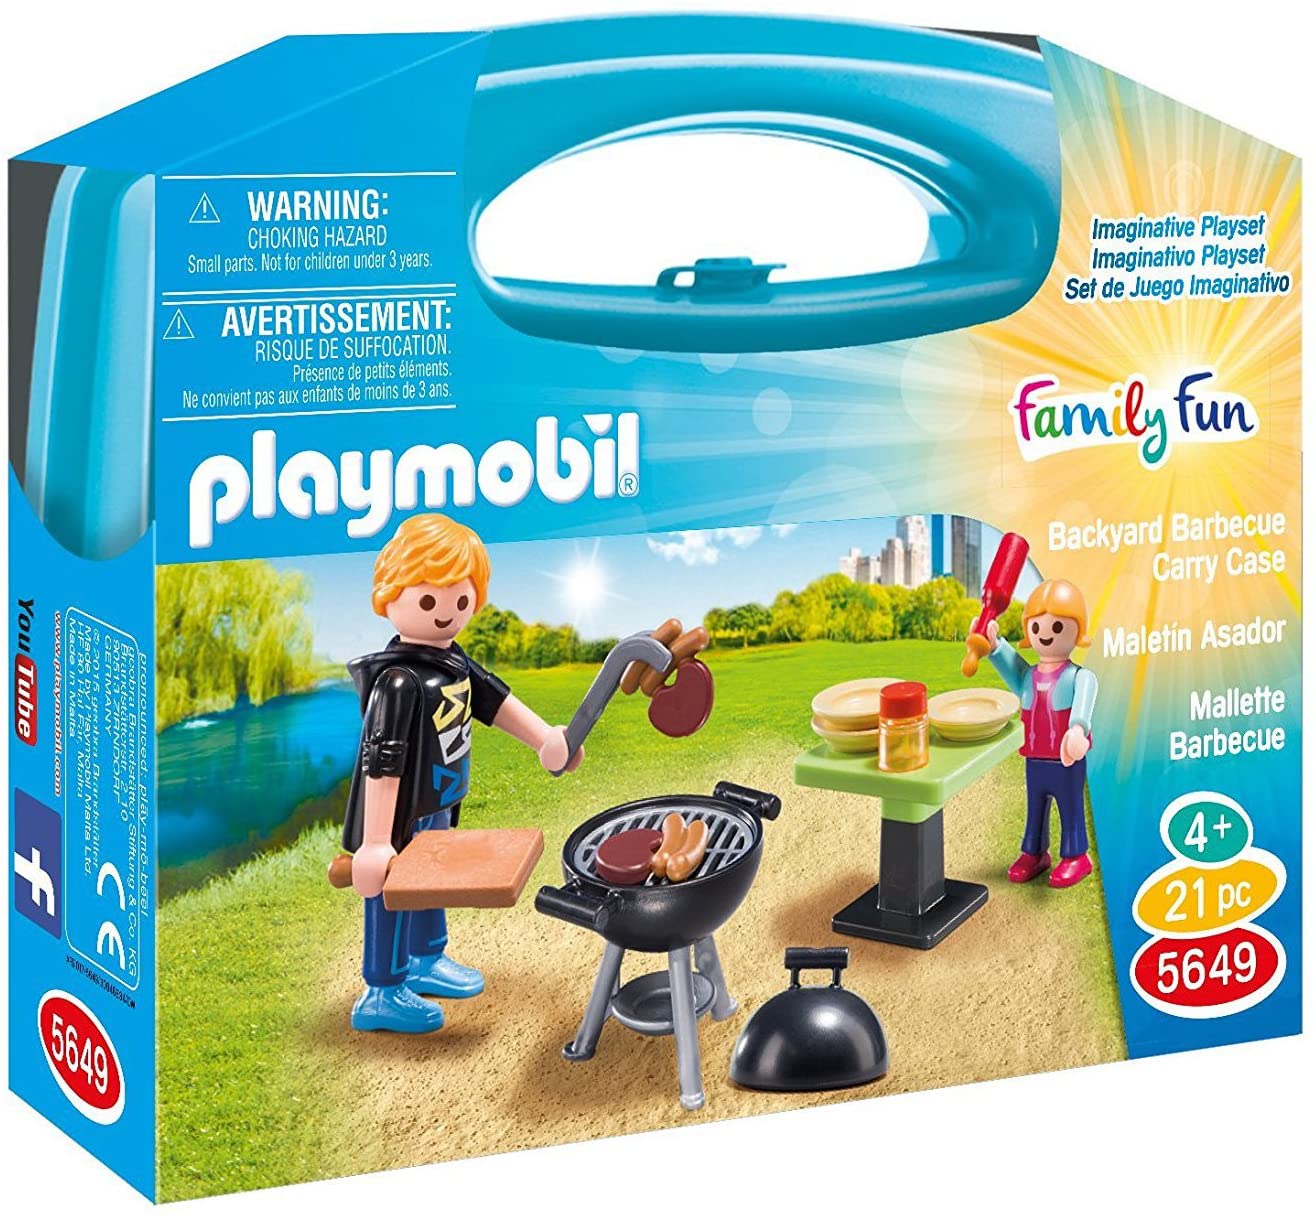 Jouet playmobil 5649 Family Fun – Malette Barbecue